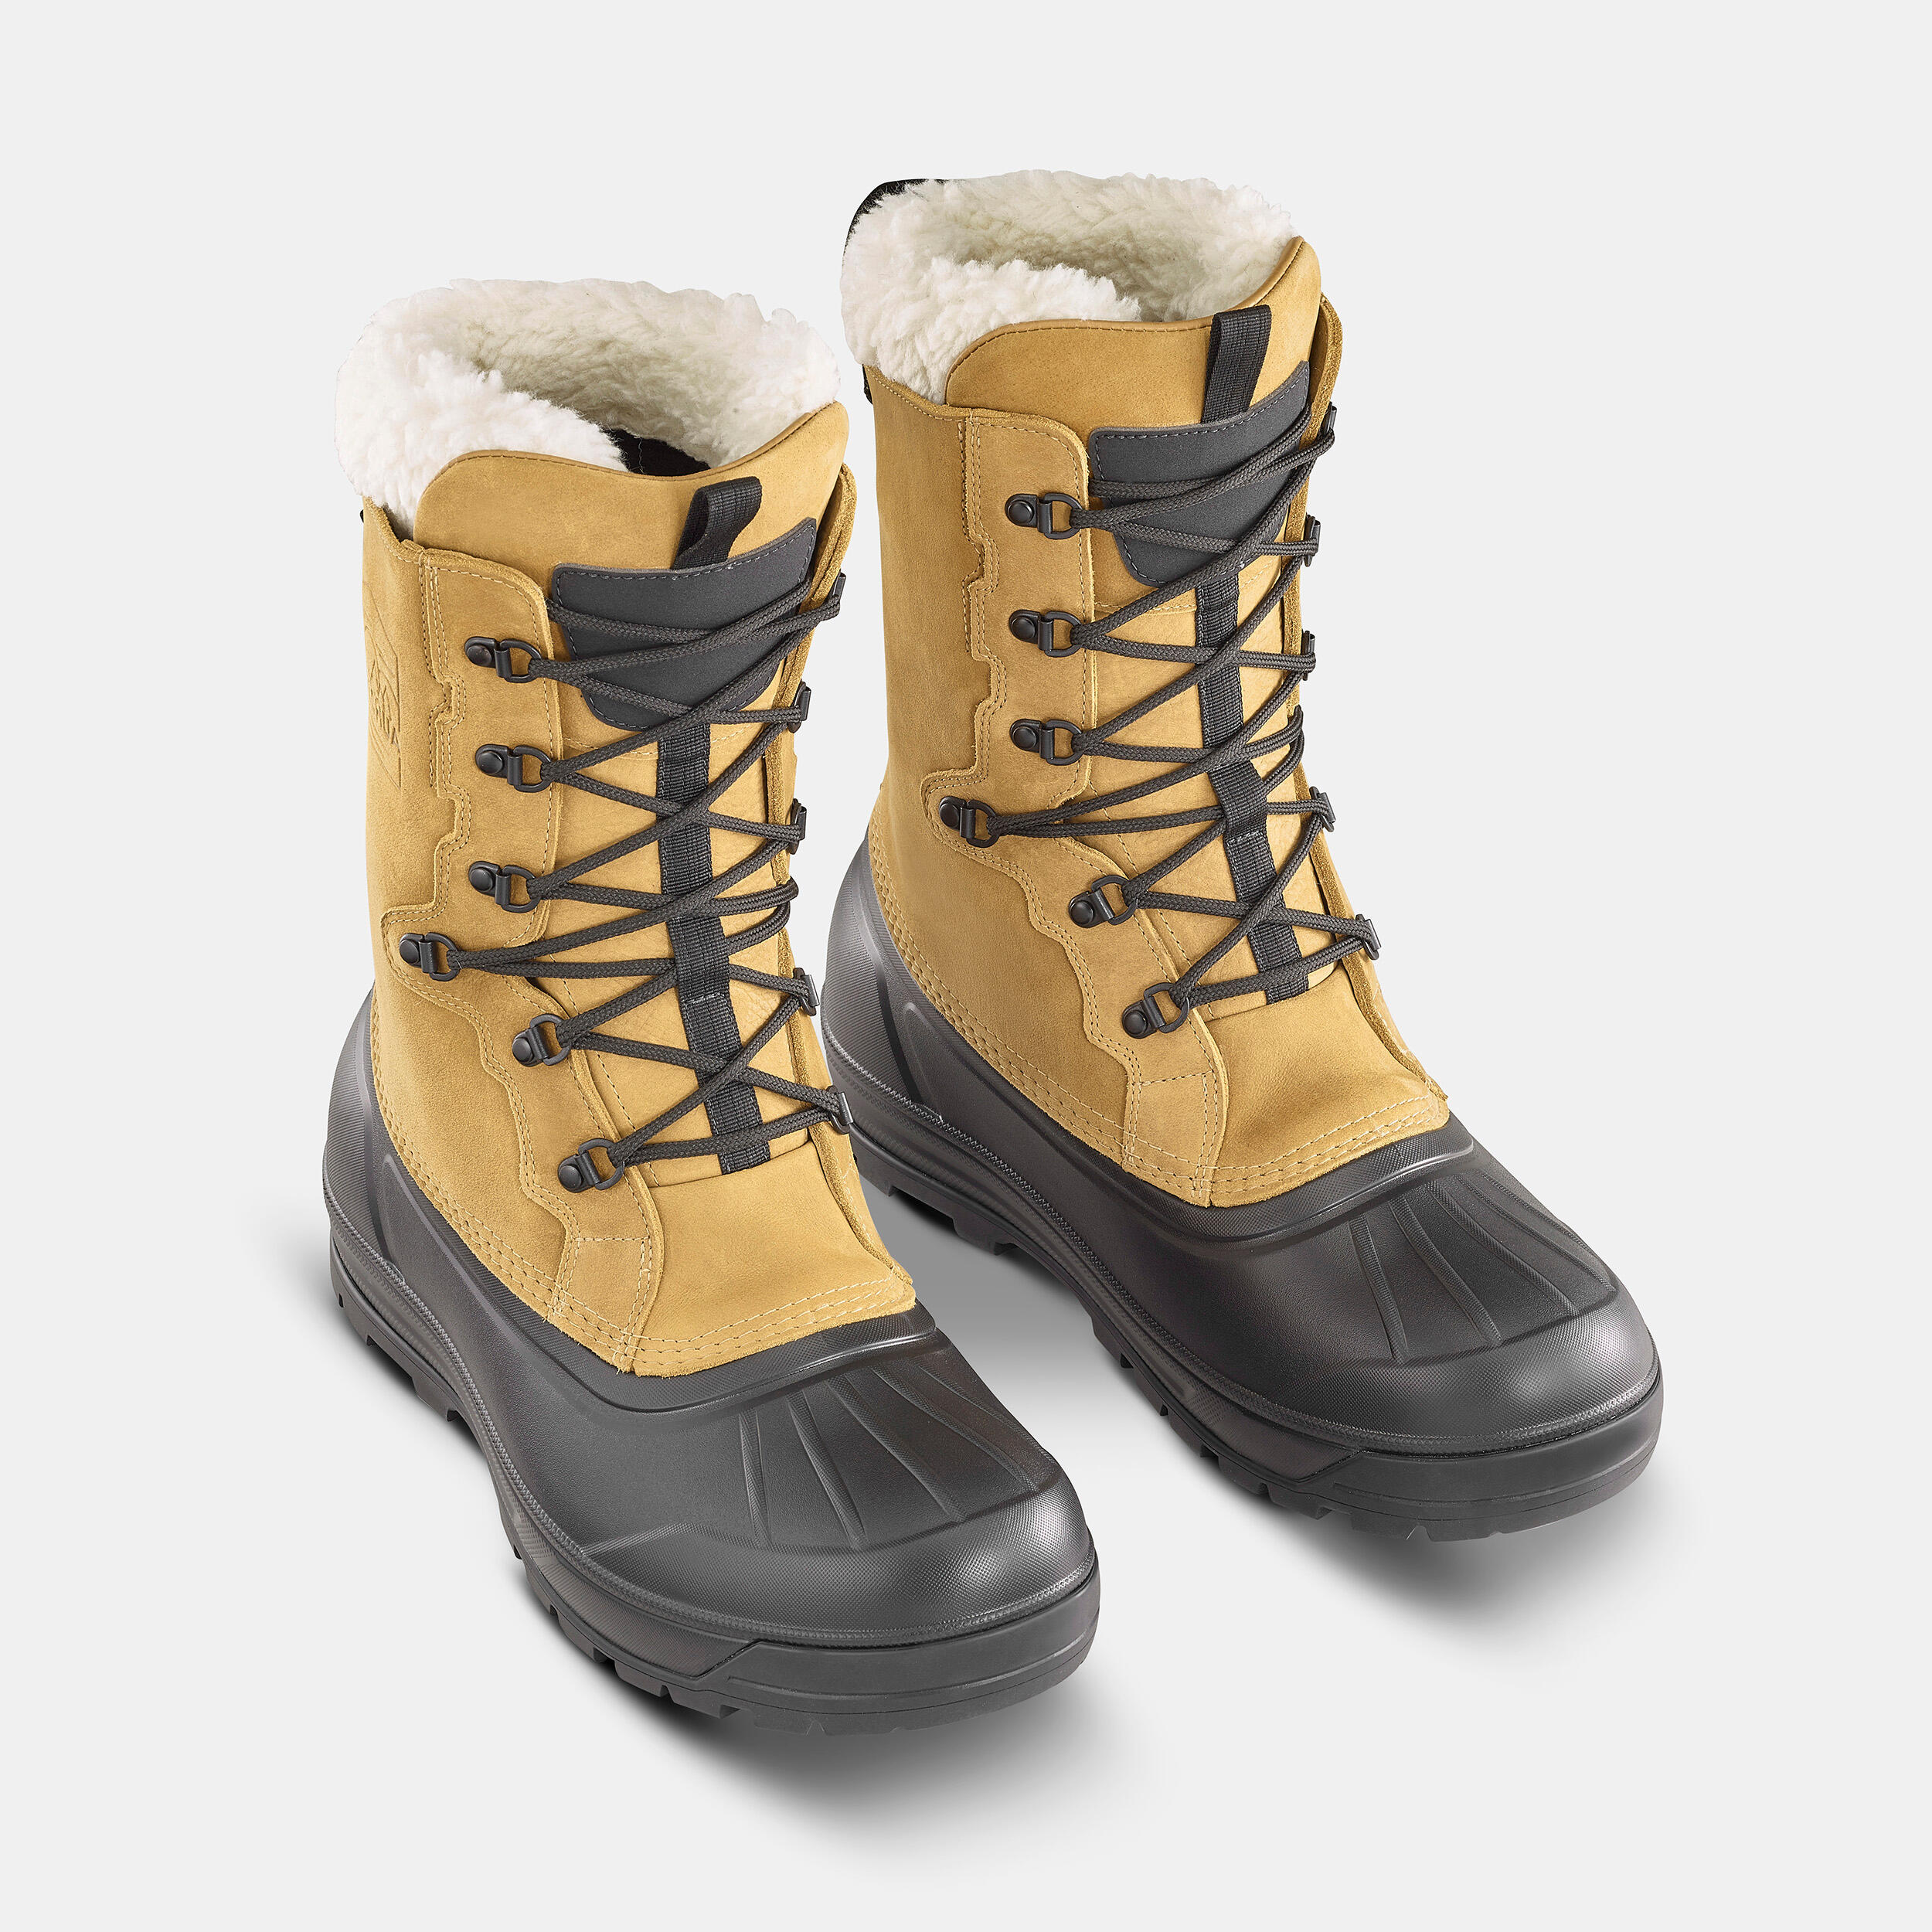 Leather Warm Waterproof Snow Boots  - SH900 lace-up - Men’s 4/11